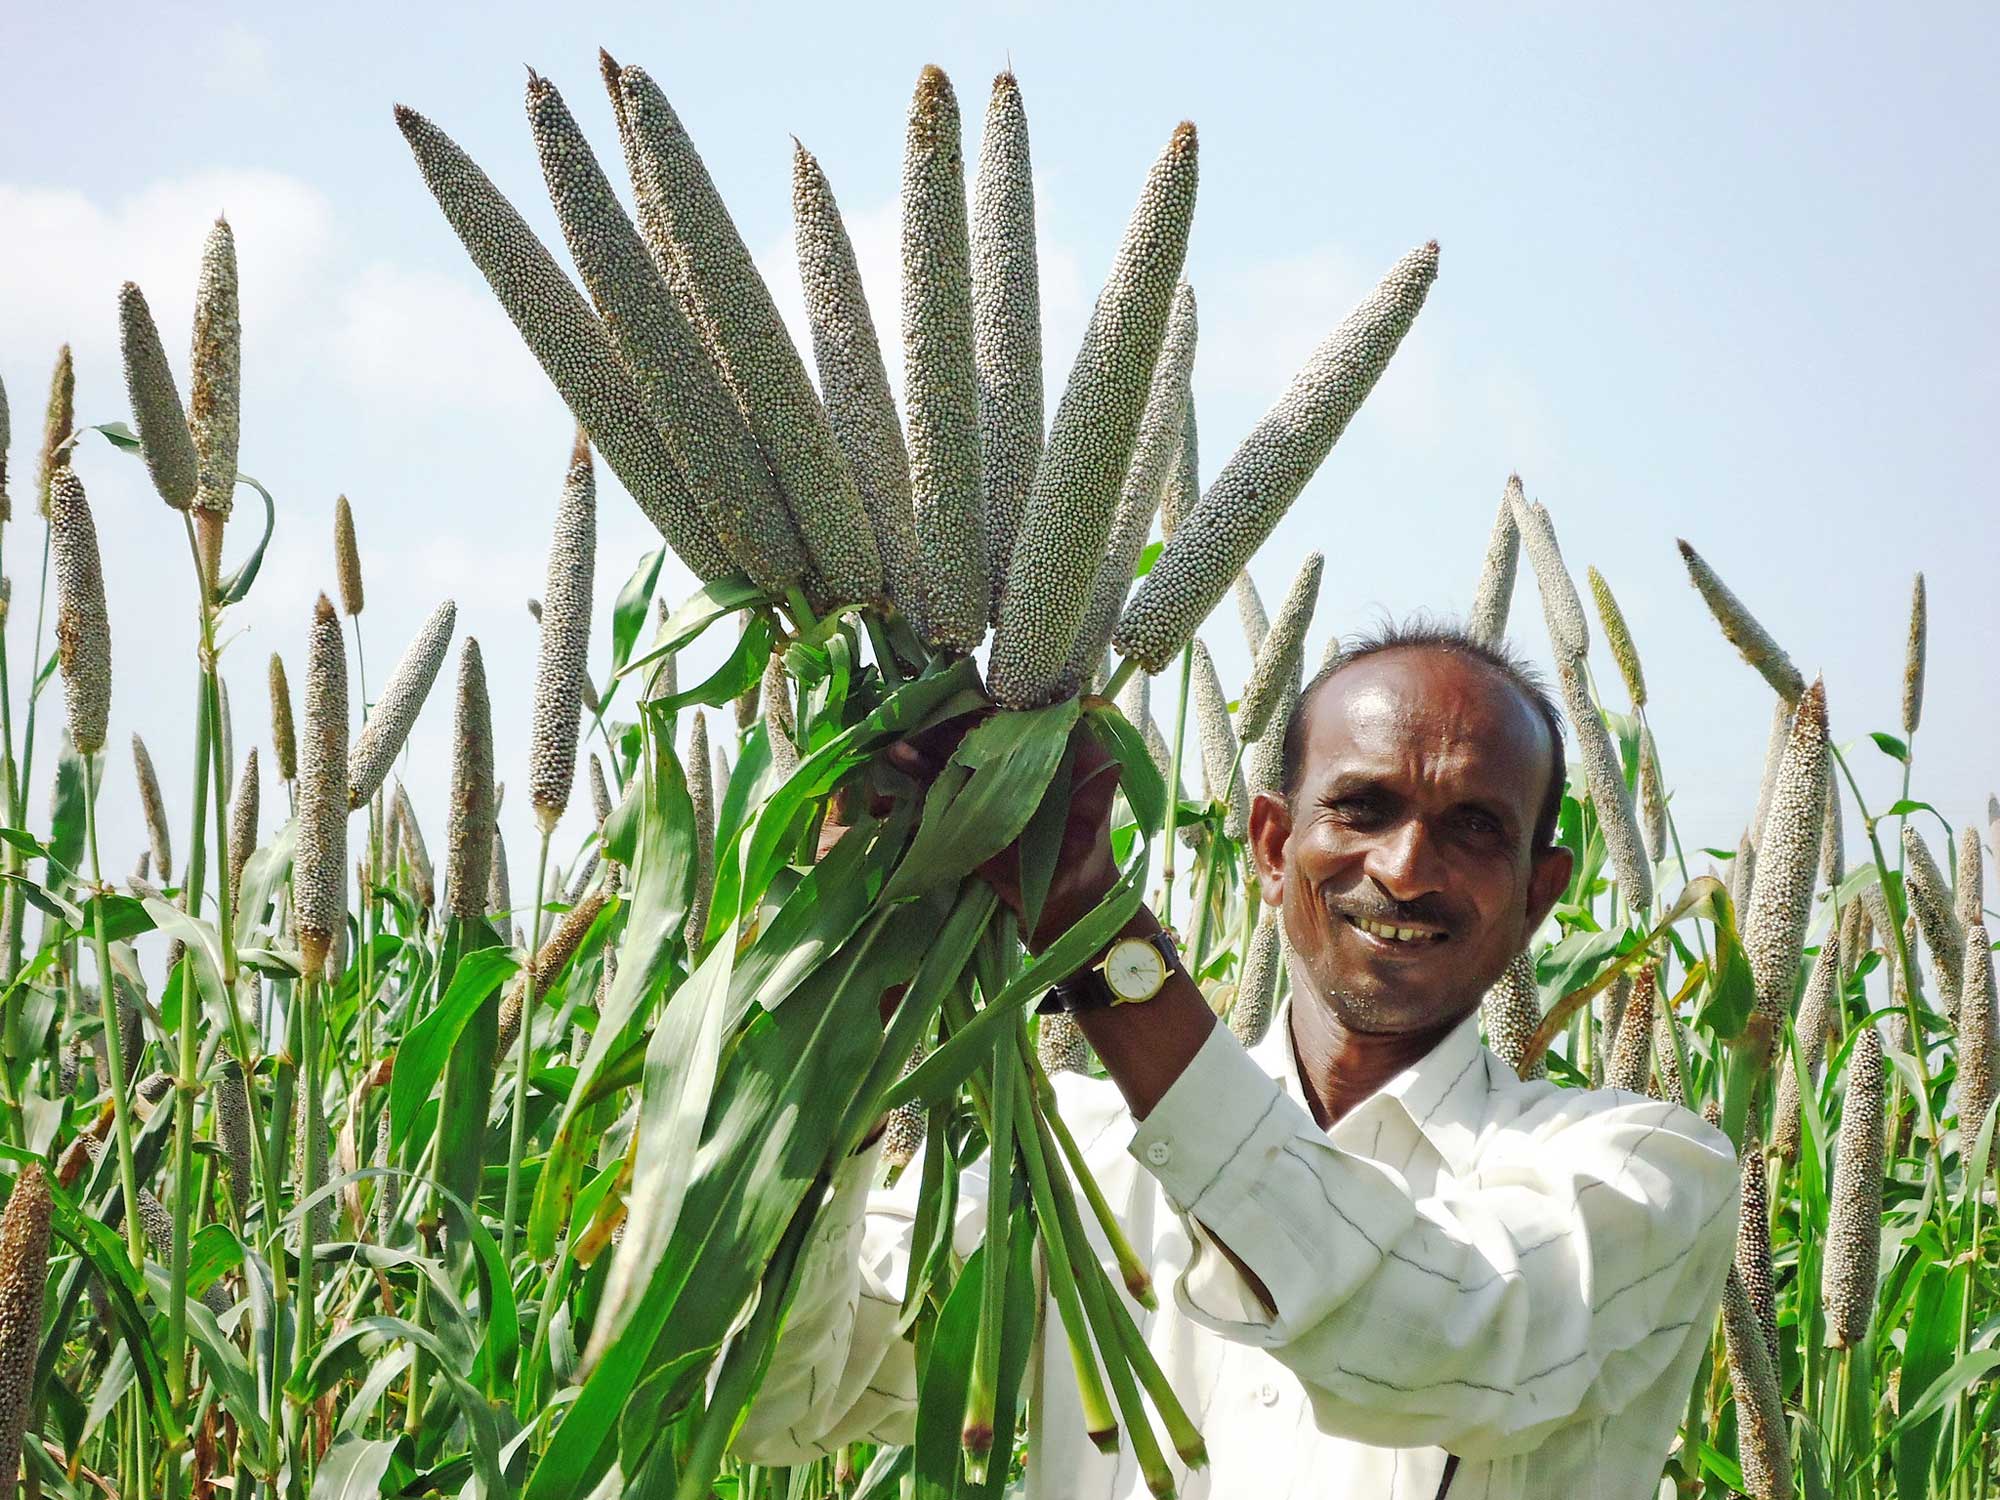 Photograph of a man holding up a bundle of pearl millet ears in India. The man is wearing a white button-down shirt and a watch. He is using both hands to hold up a bundle of about 10 millet ears. The millet consists of oblong heads of grain attached to cut stems with long, green leaves. A field of millet can be seen in the background.